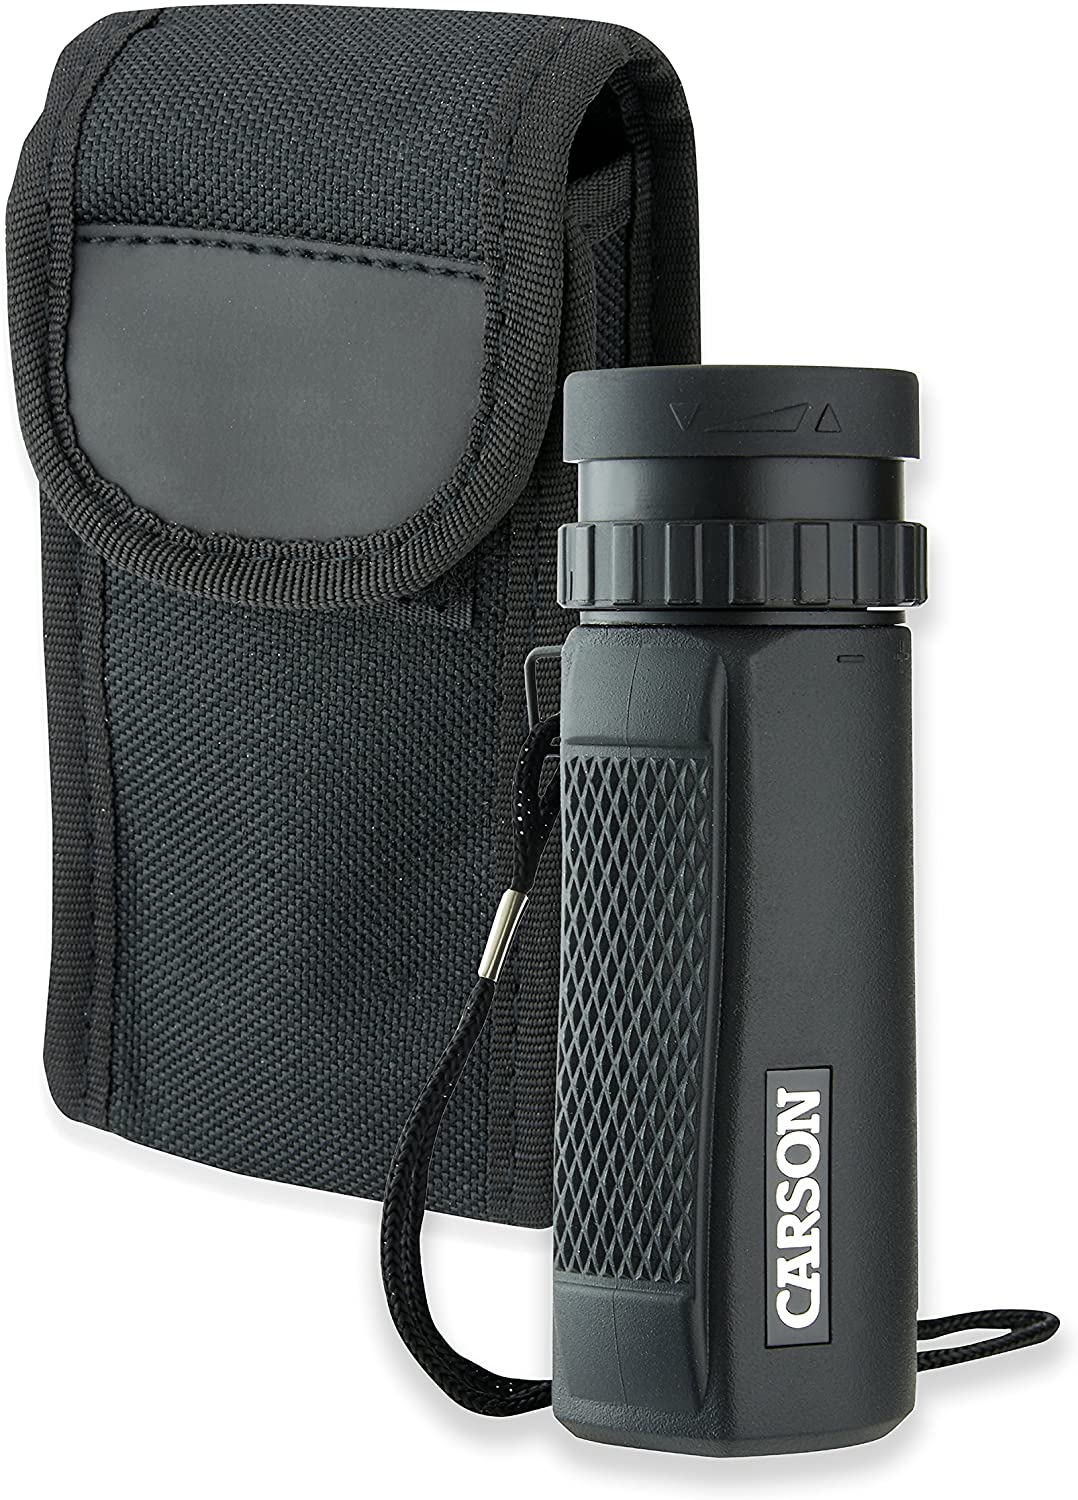 Carson 10x25 BlackWave Waterproof Monocular with Close Focus of 1.2m 